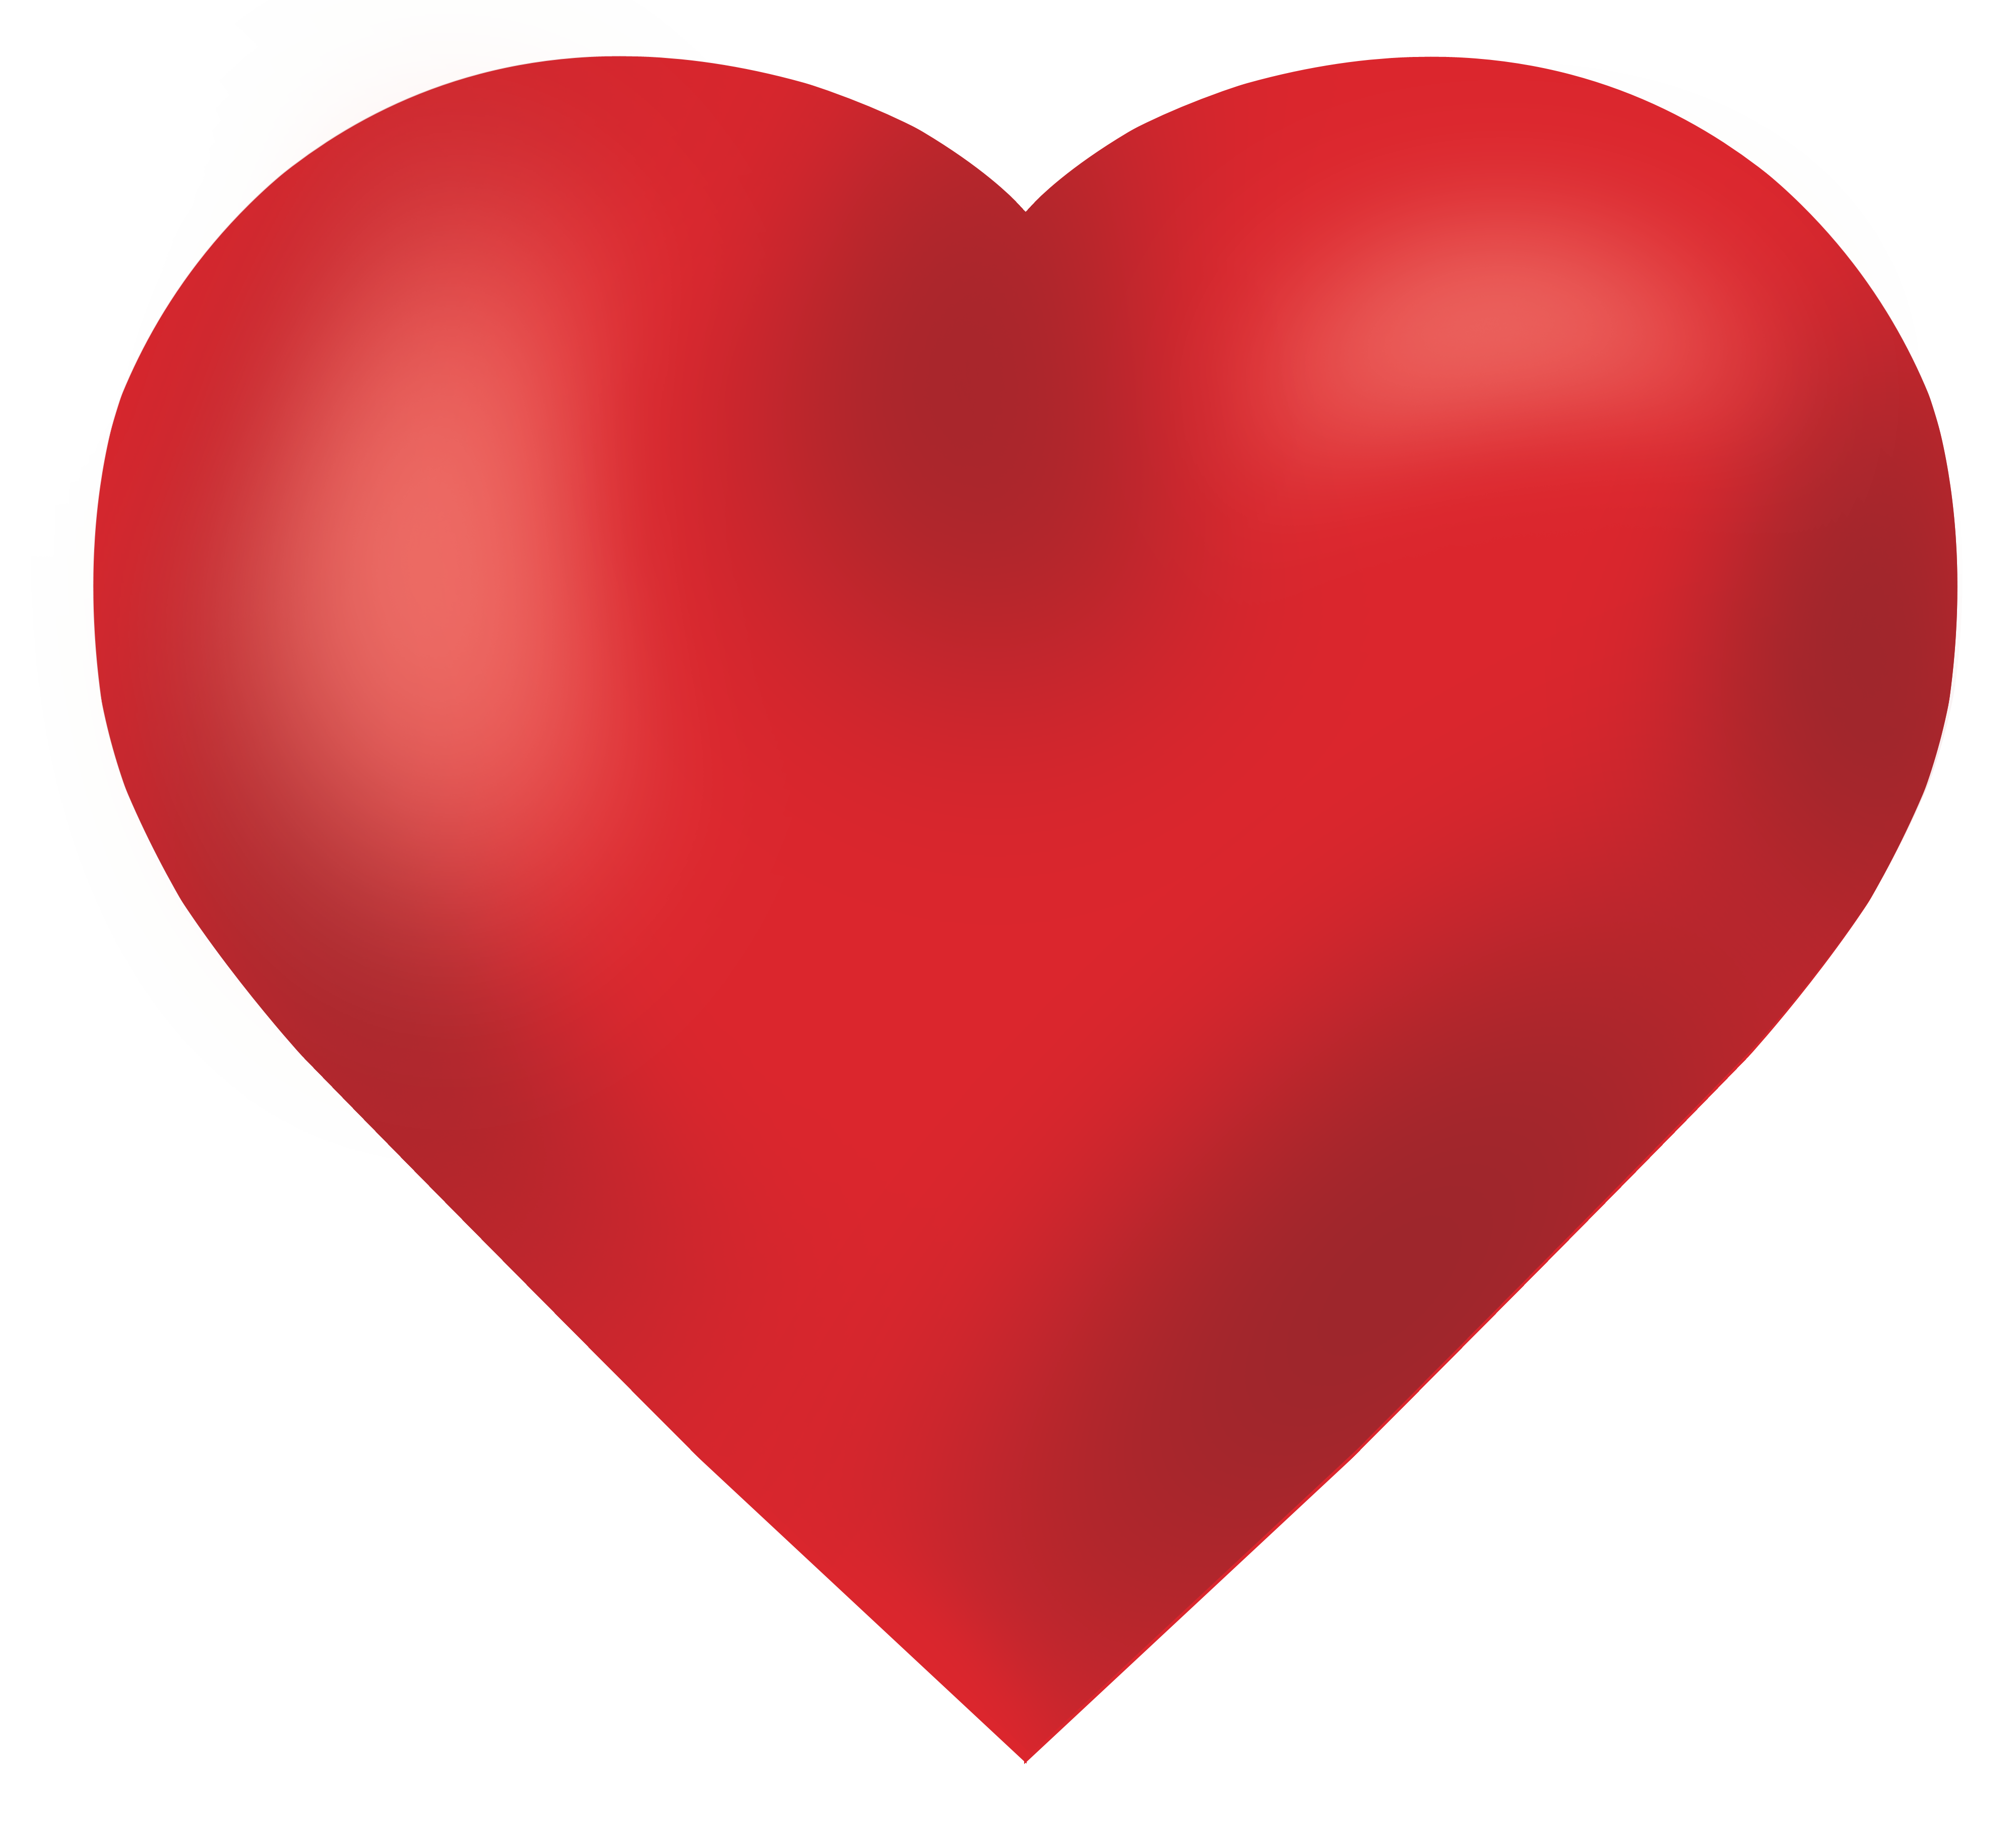 Heart PNG image, free downloa